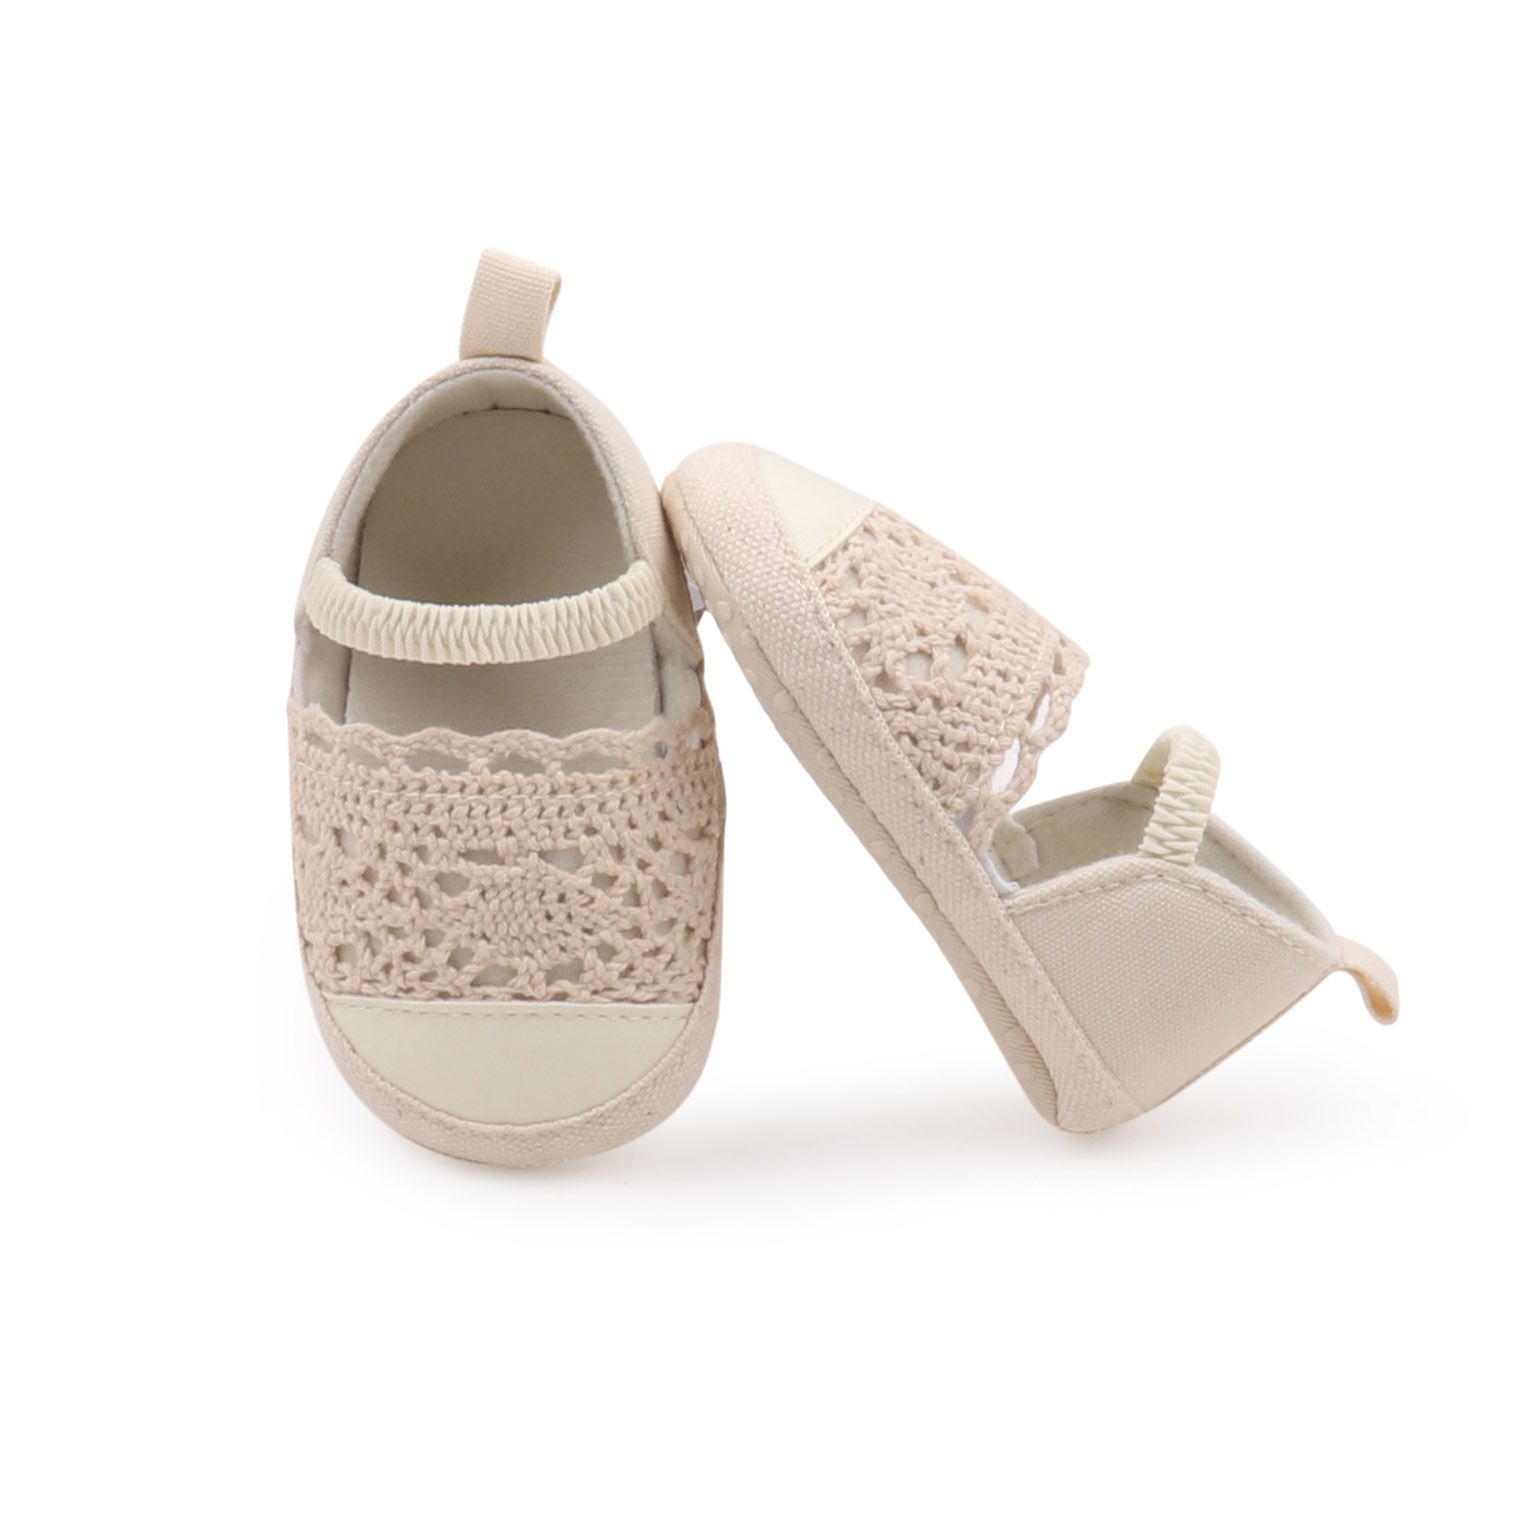 Baby/Toddler Girl Casual Style Solid Color Crafted Crochet Shoes